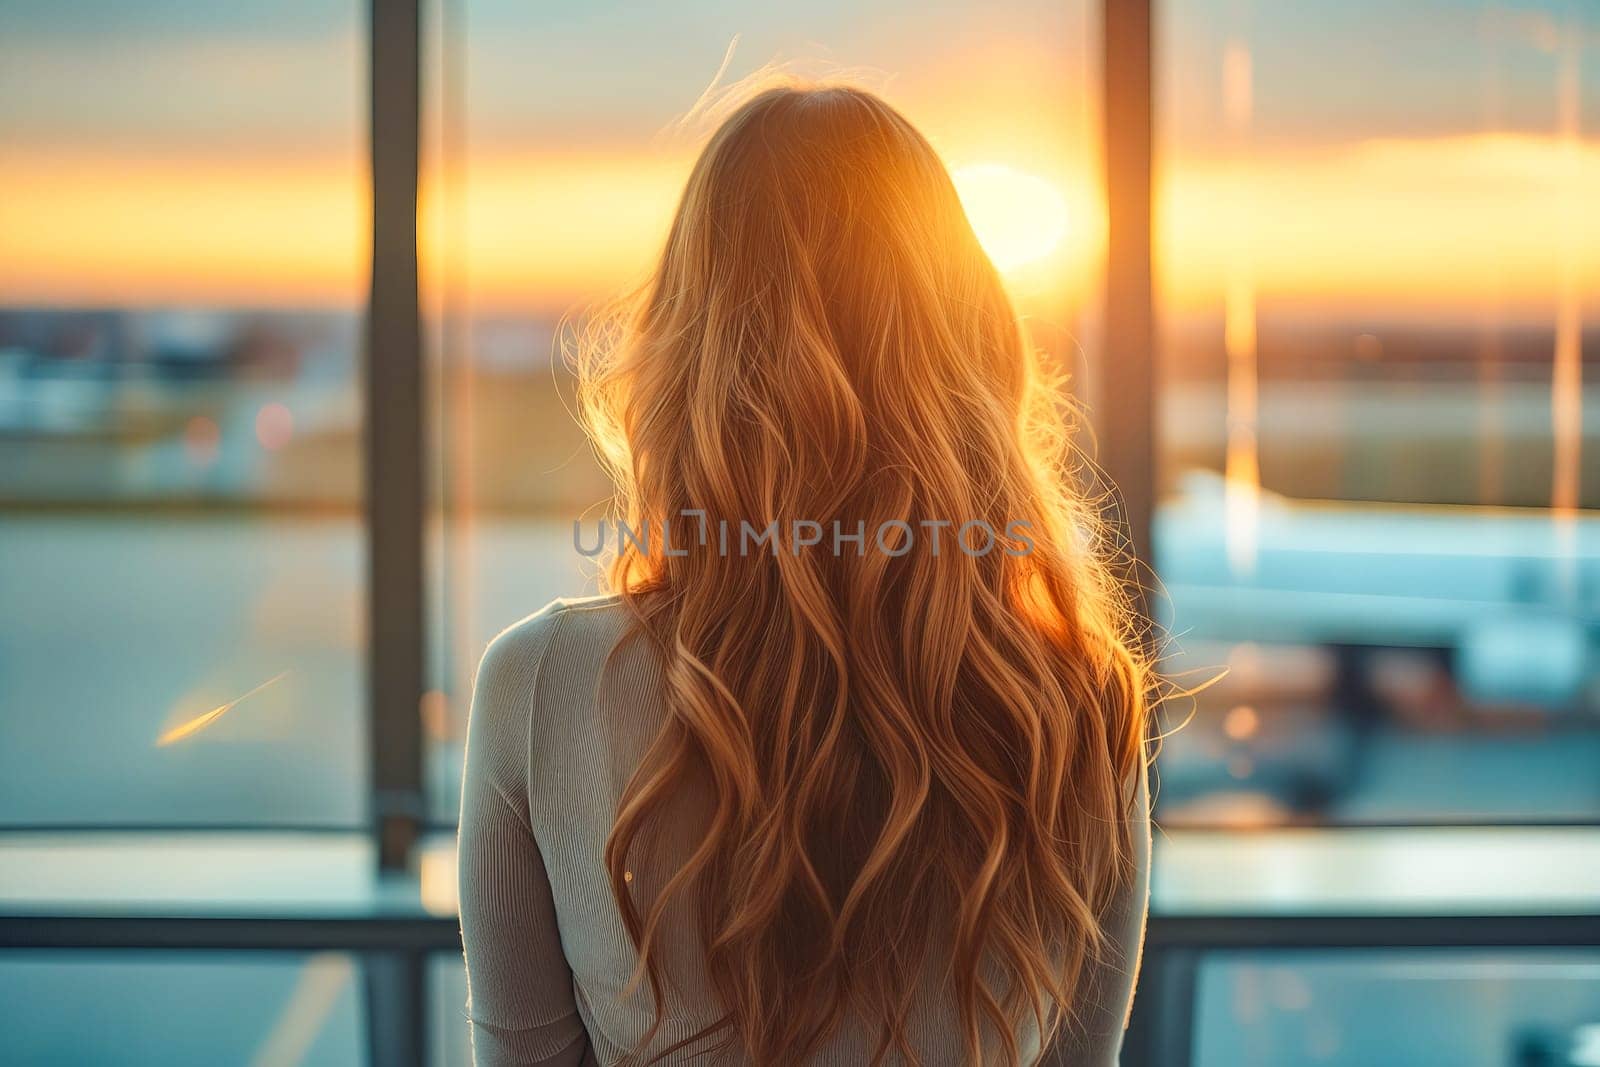 A woman with long red hair is looking out the window of an airplane. The sun is setting, casting a warm glow over the scene. The woman is lost in thought. Generative AI